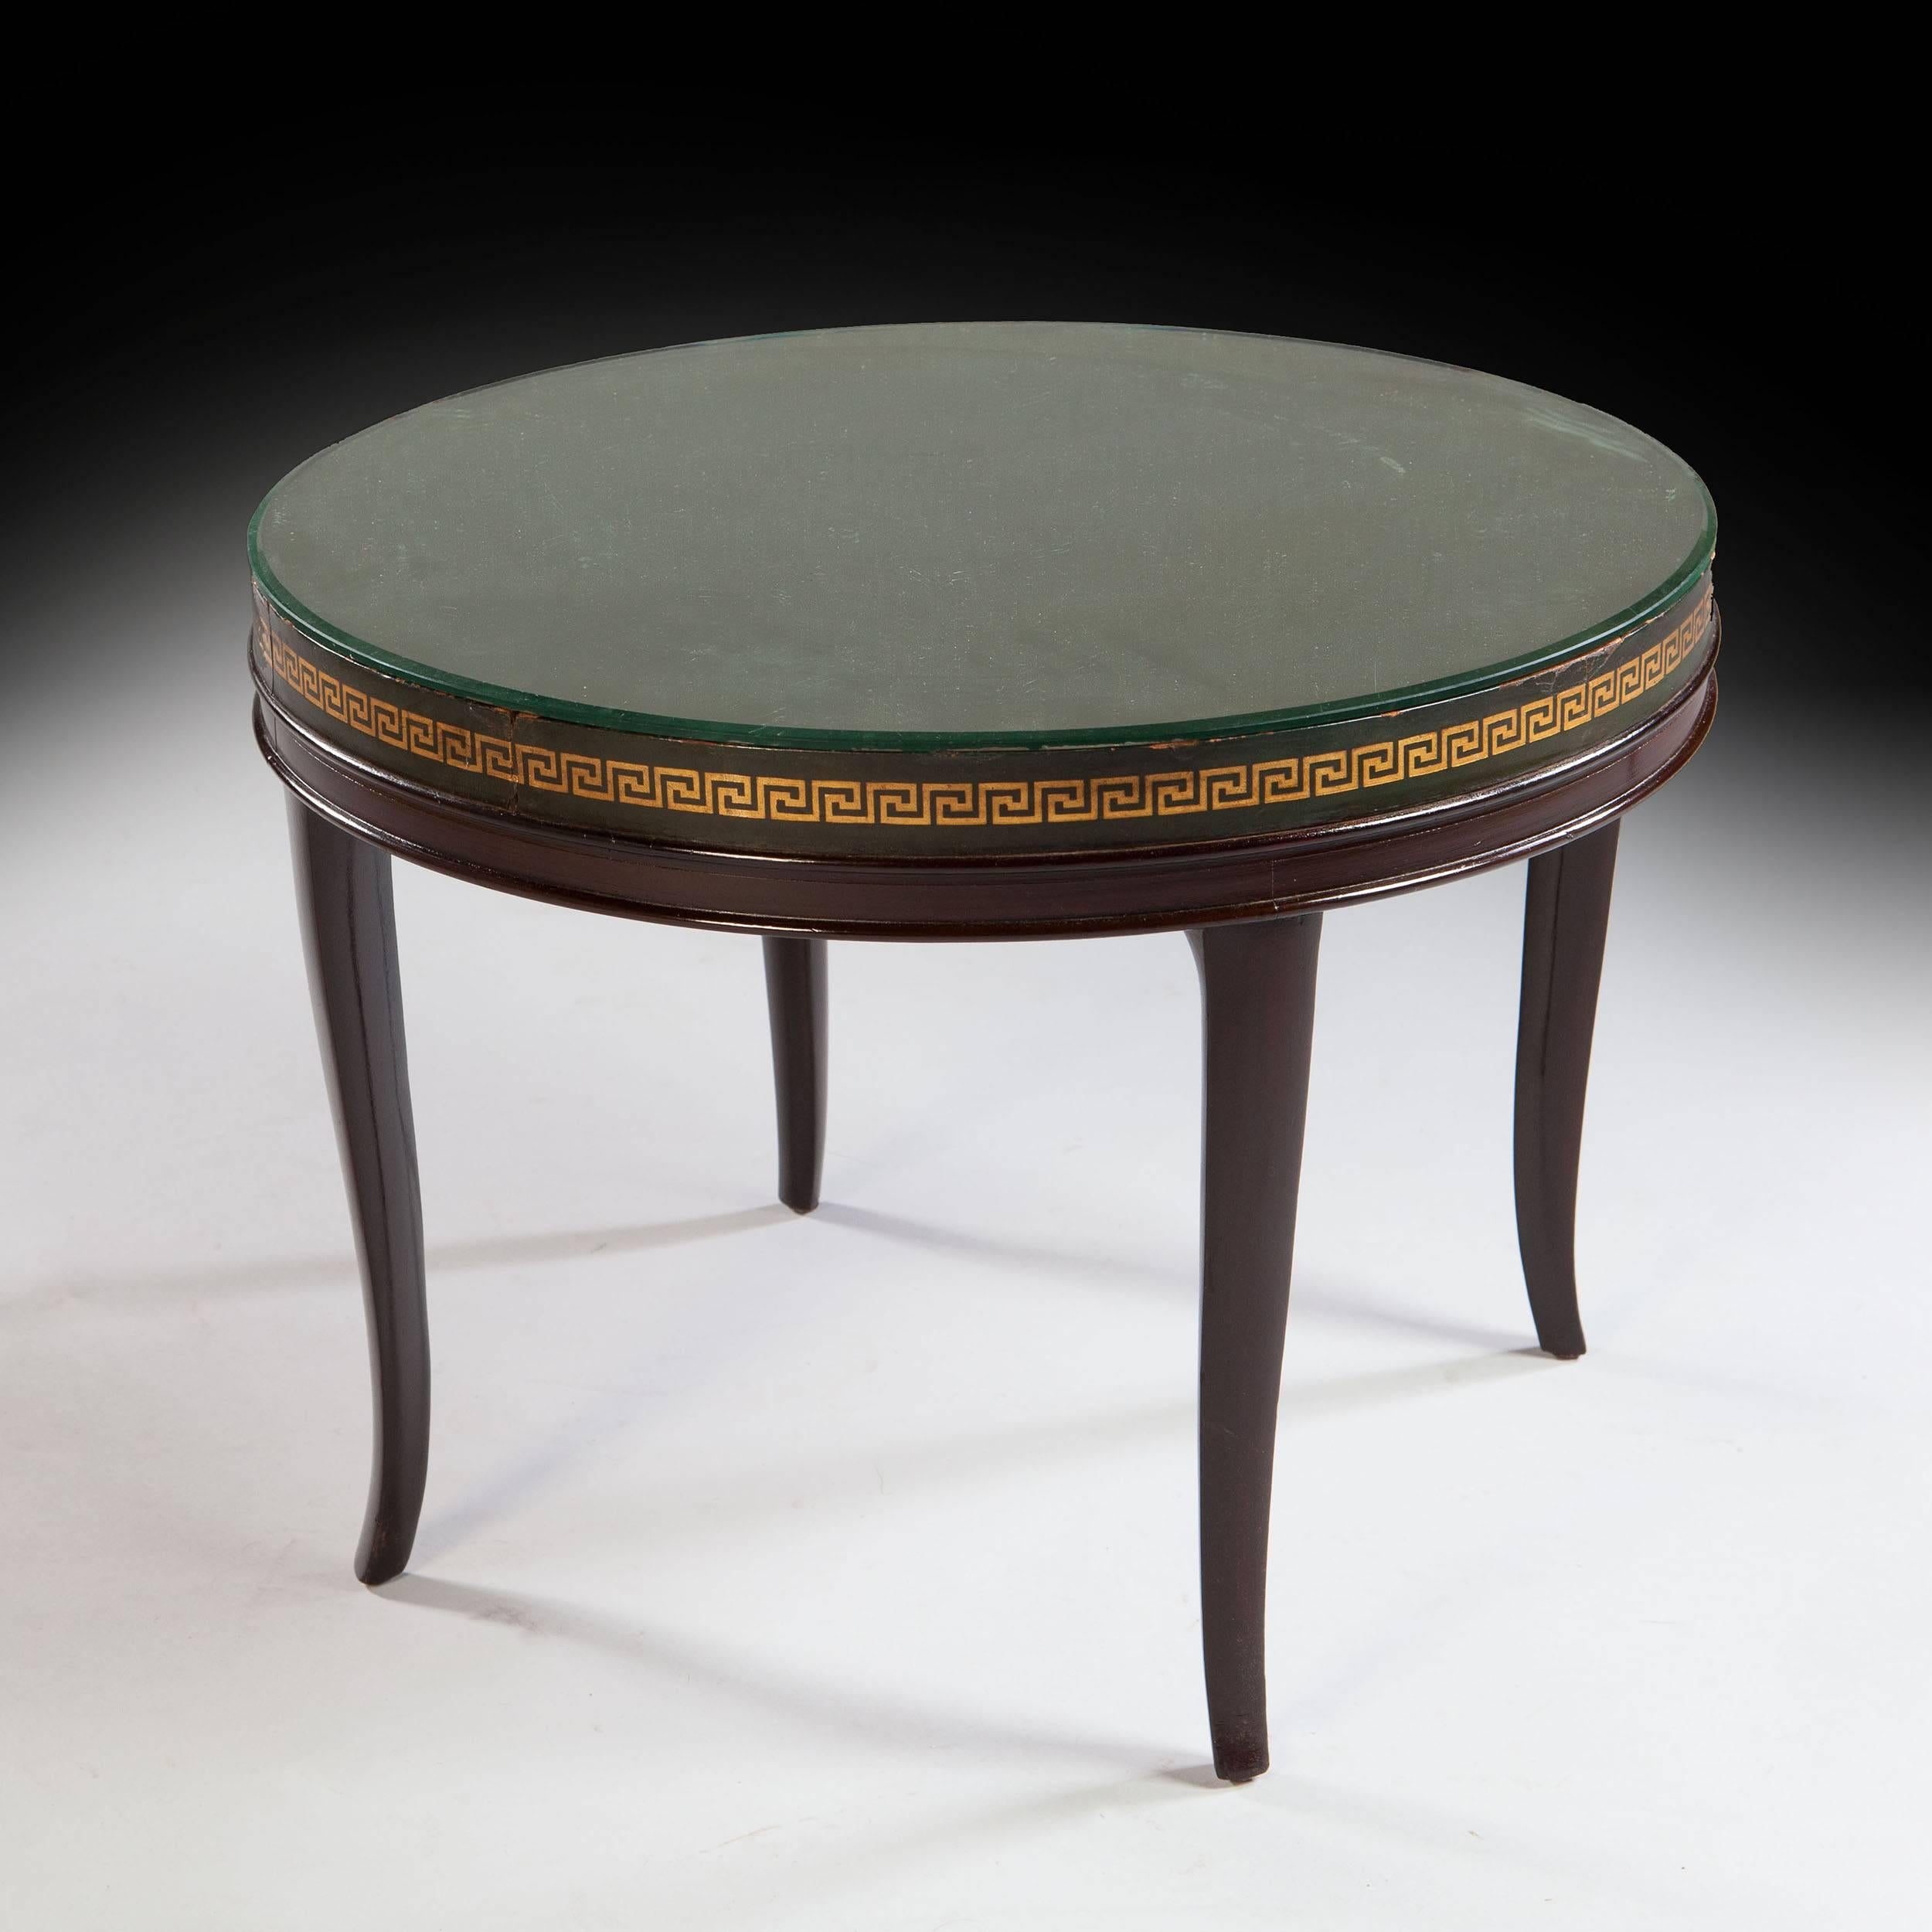 A mid-20th century Art Deco round occasional table, retaining its original beveled mirror top, above a leather frieze with Greek key gilt tooled ornament, the whole raised on curved tapering legs.

Stamped on the underside, Property of the Savoy